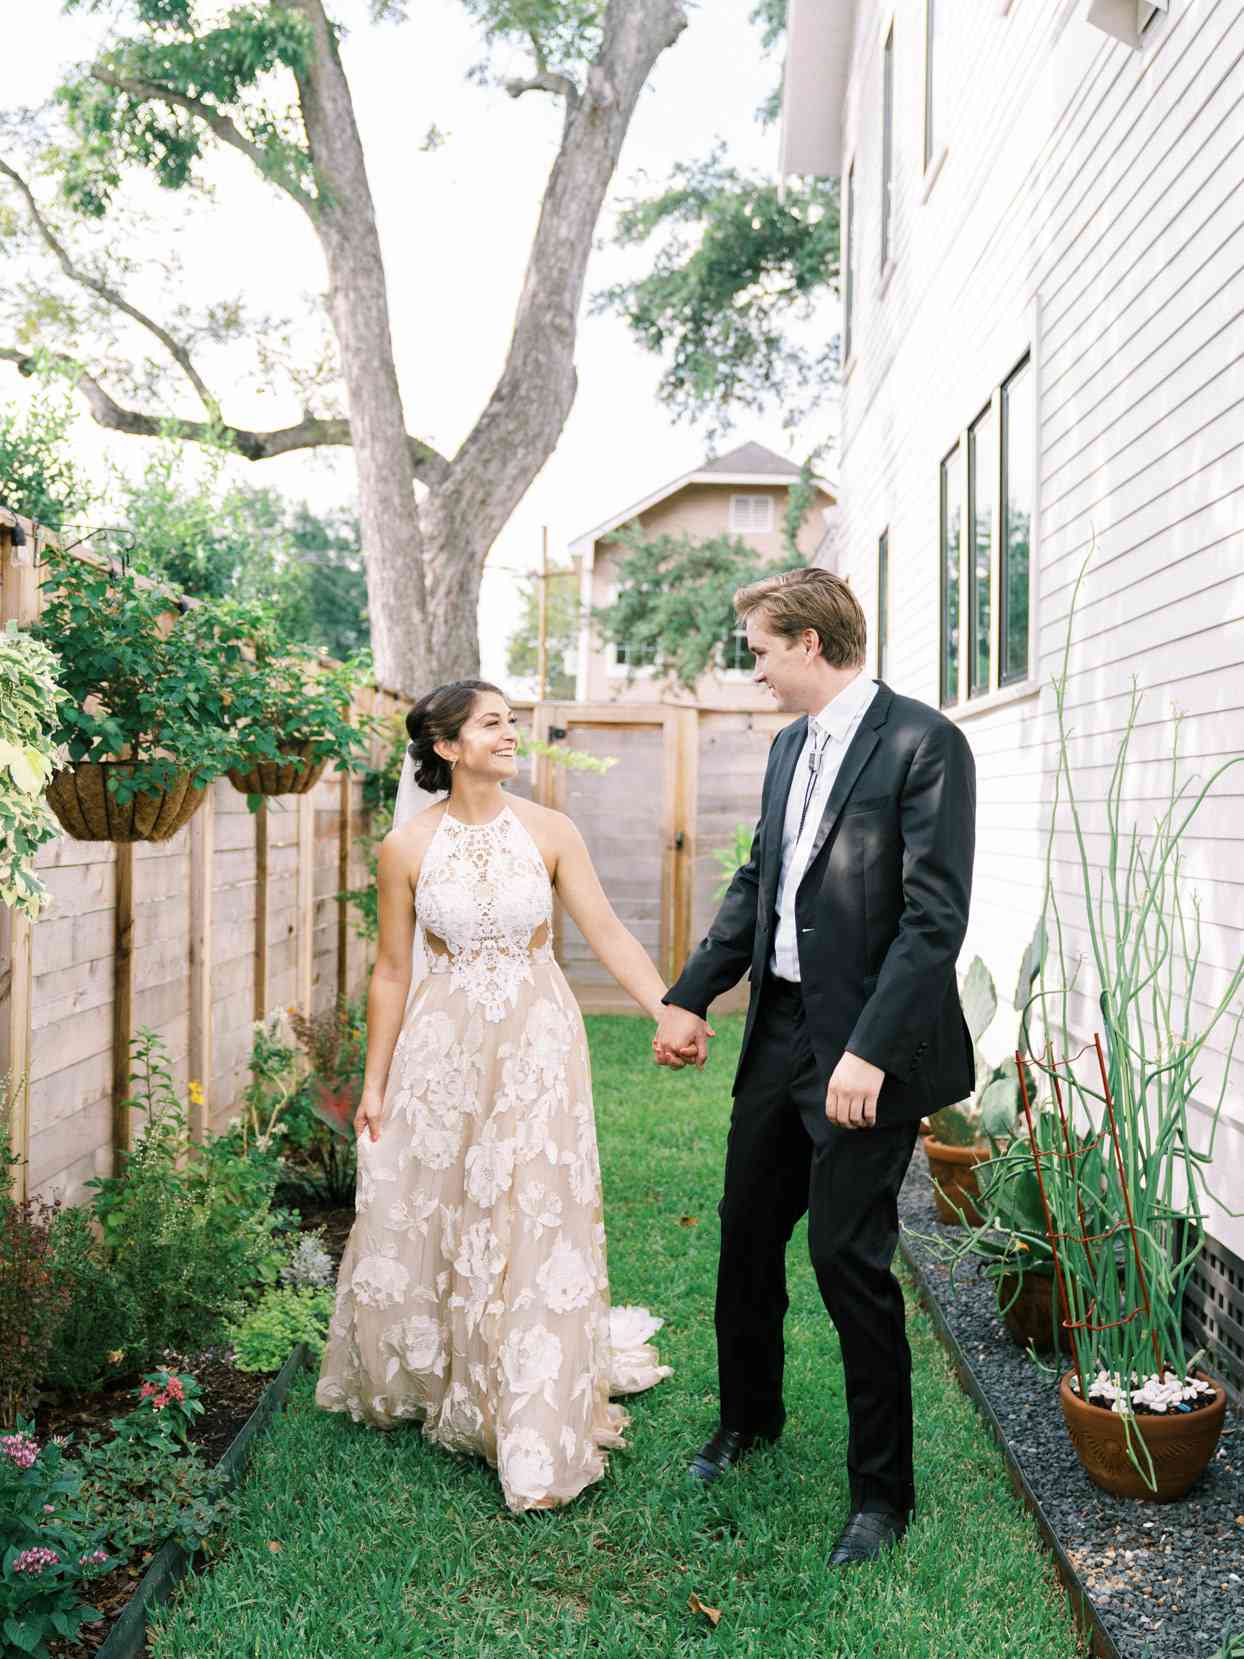 wedding couple holding hands and walking through small pathway on side of house